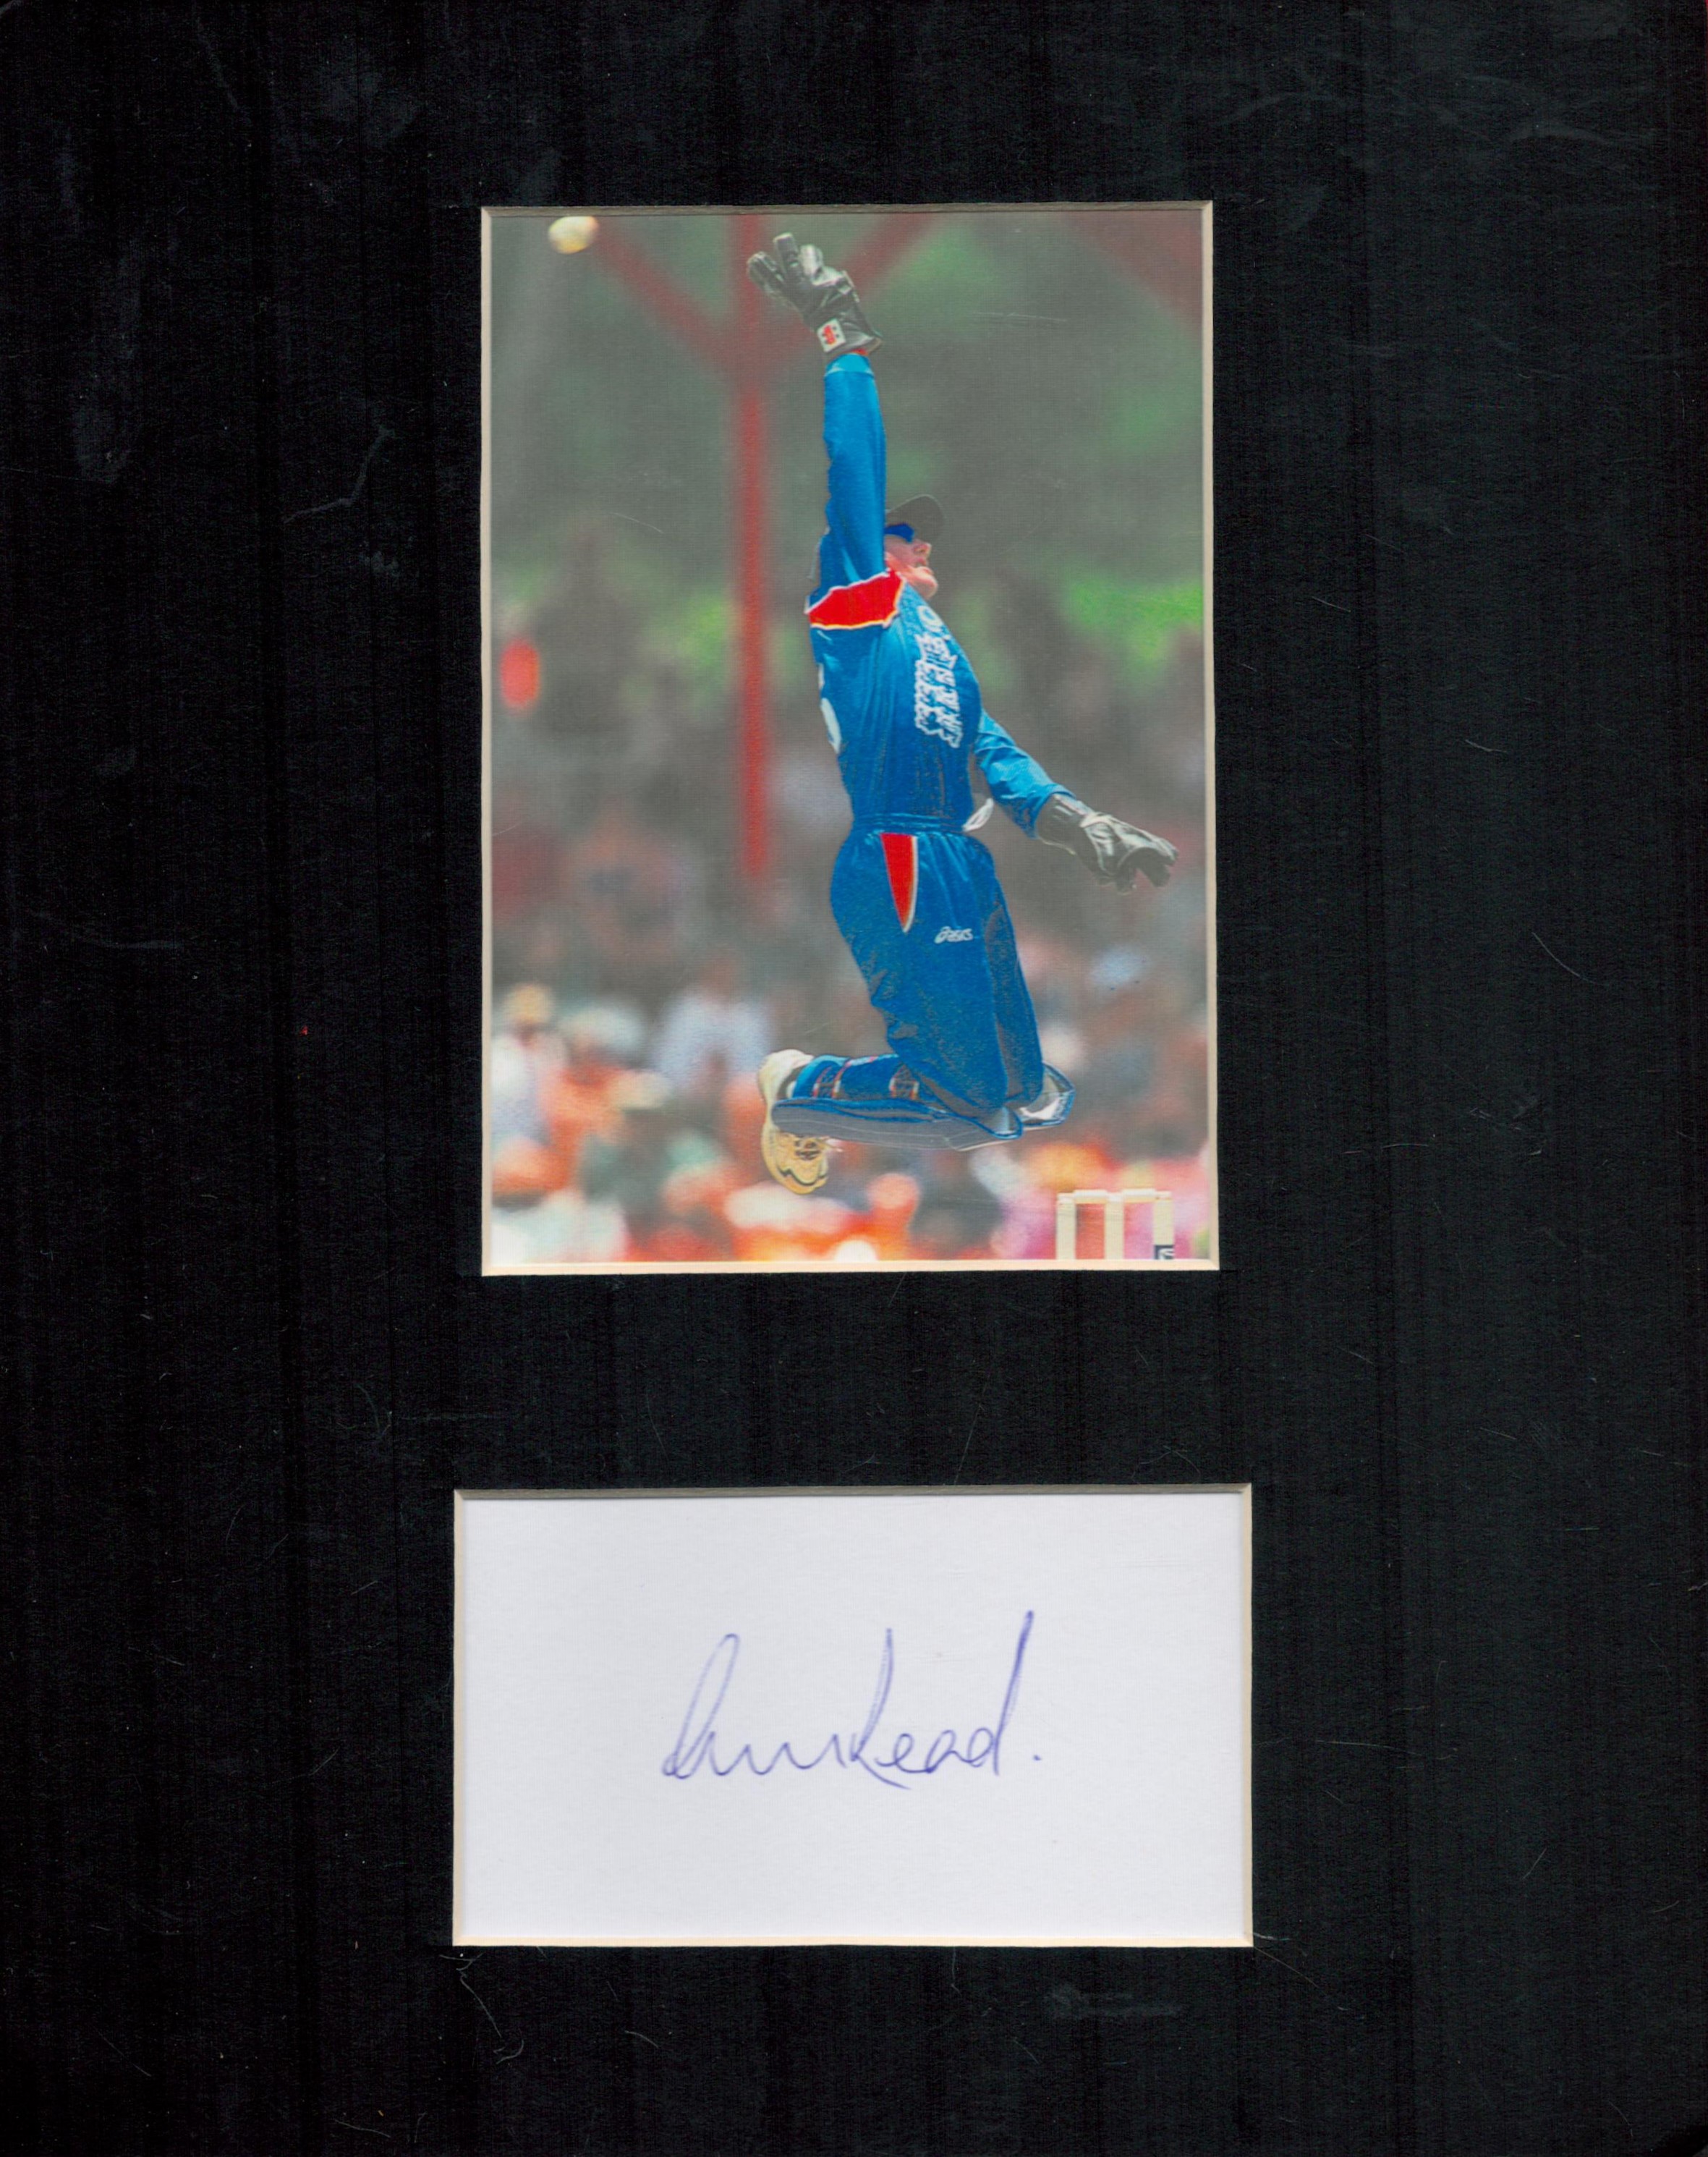 Former England Cricketer Chris Read Signed Signature Piece with Colour Photo Mounted to an overall